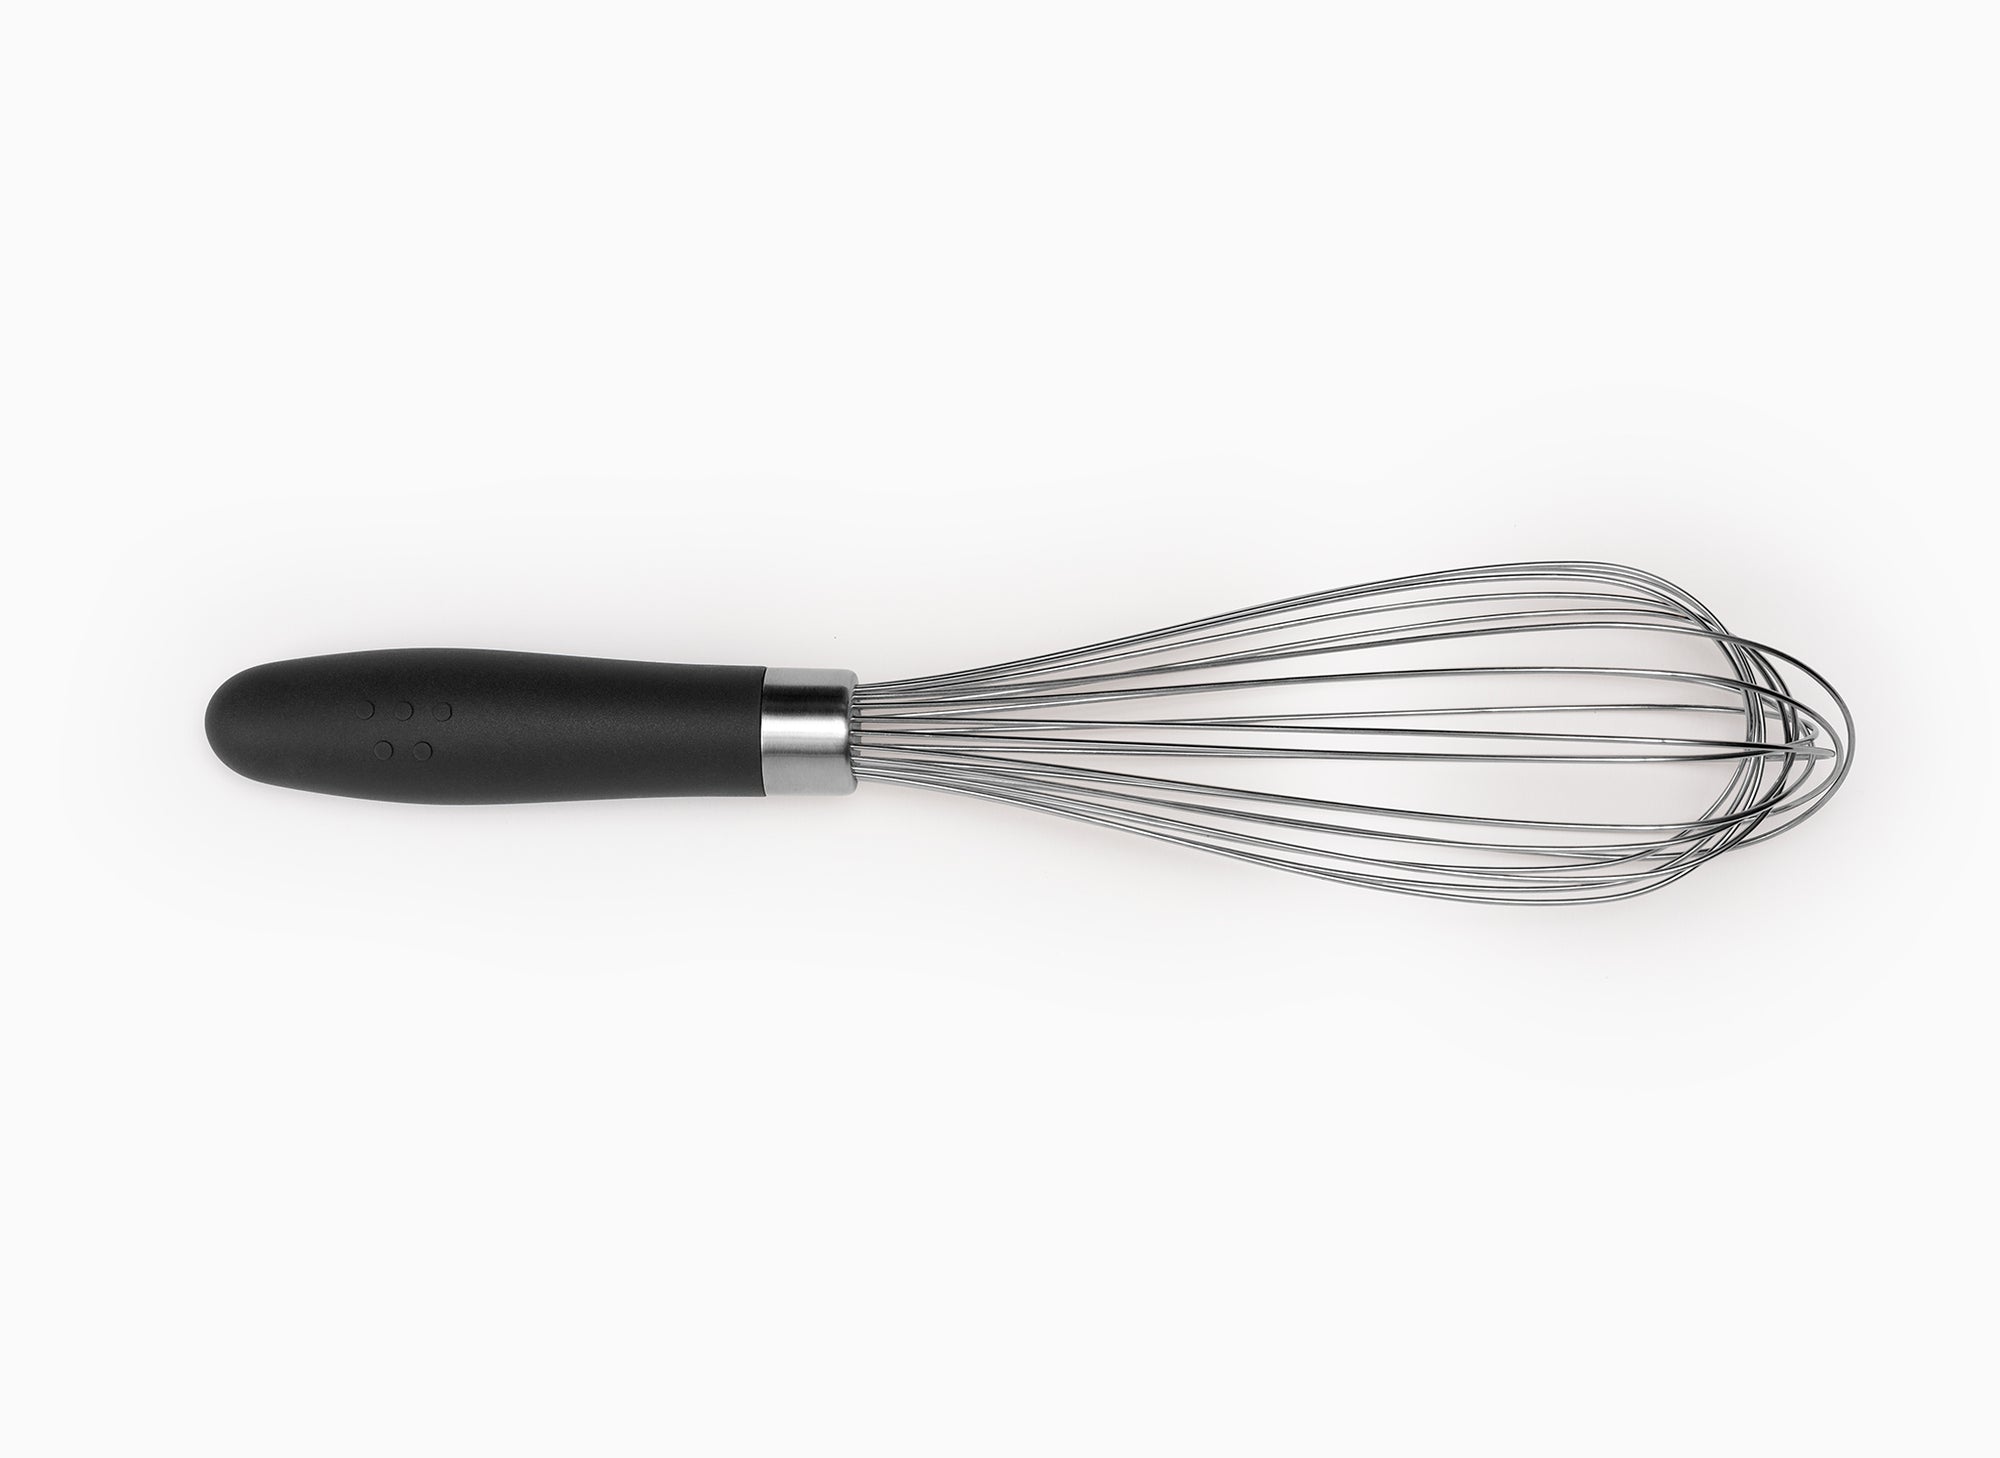  Misen Stainless Steel Whisk with Silicone Handle - Large  Balloon Whisks for Cooking - Metal Whisk for Stirring & Mixing, Black: Home  & Kitchen